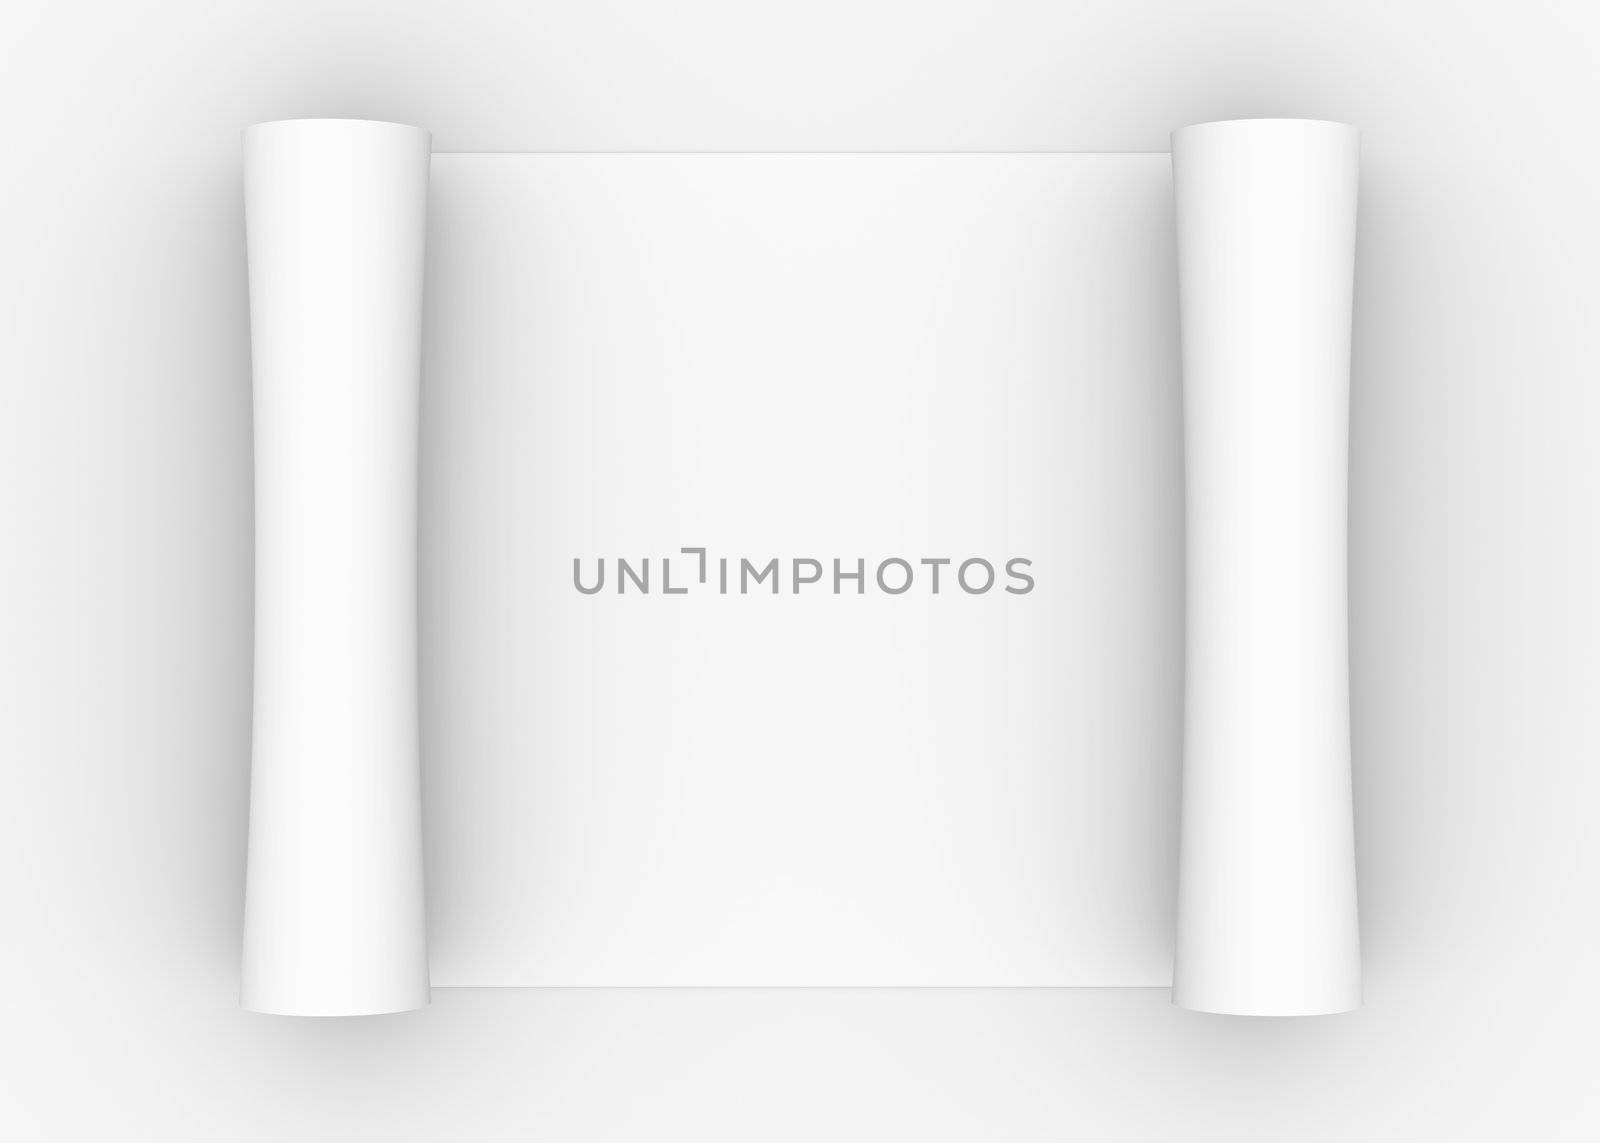 Scroll of white paper. Isolated render on a gray background